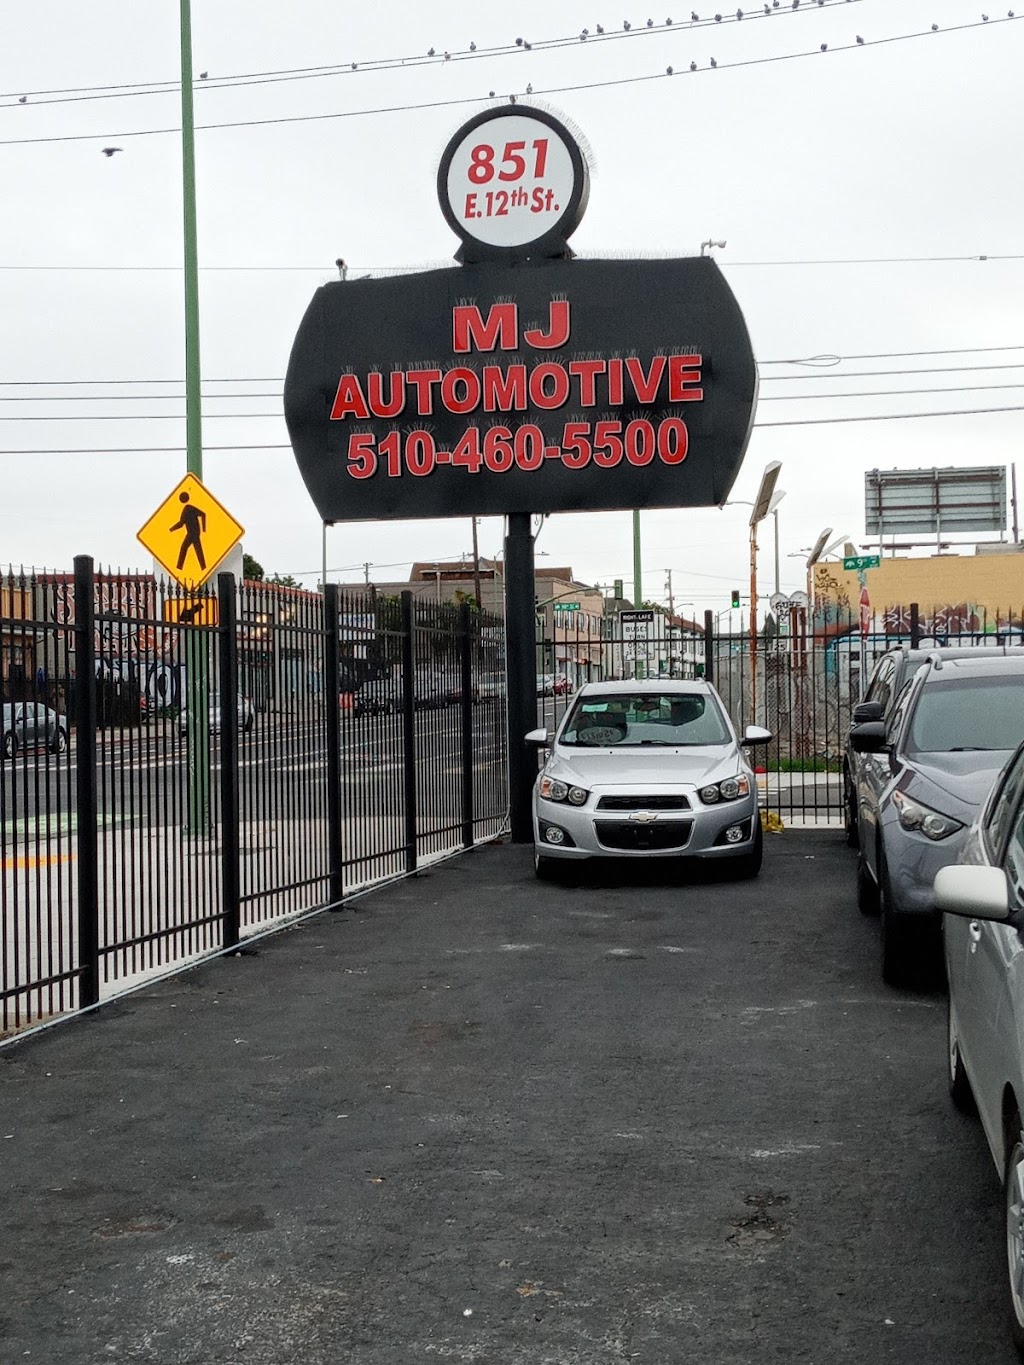 MJ Automotive Repair and Electric | 851 E 12th St, Oakland, CA 94606 | Phone: (510) 460-5500